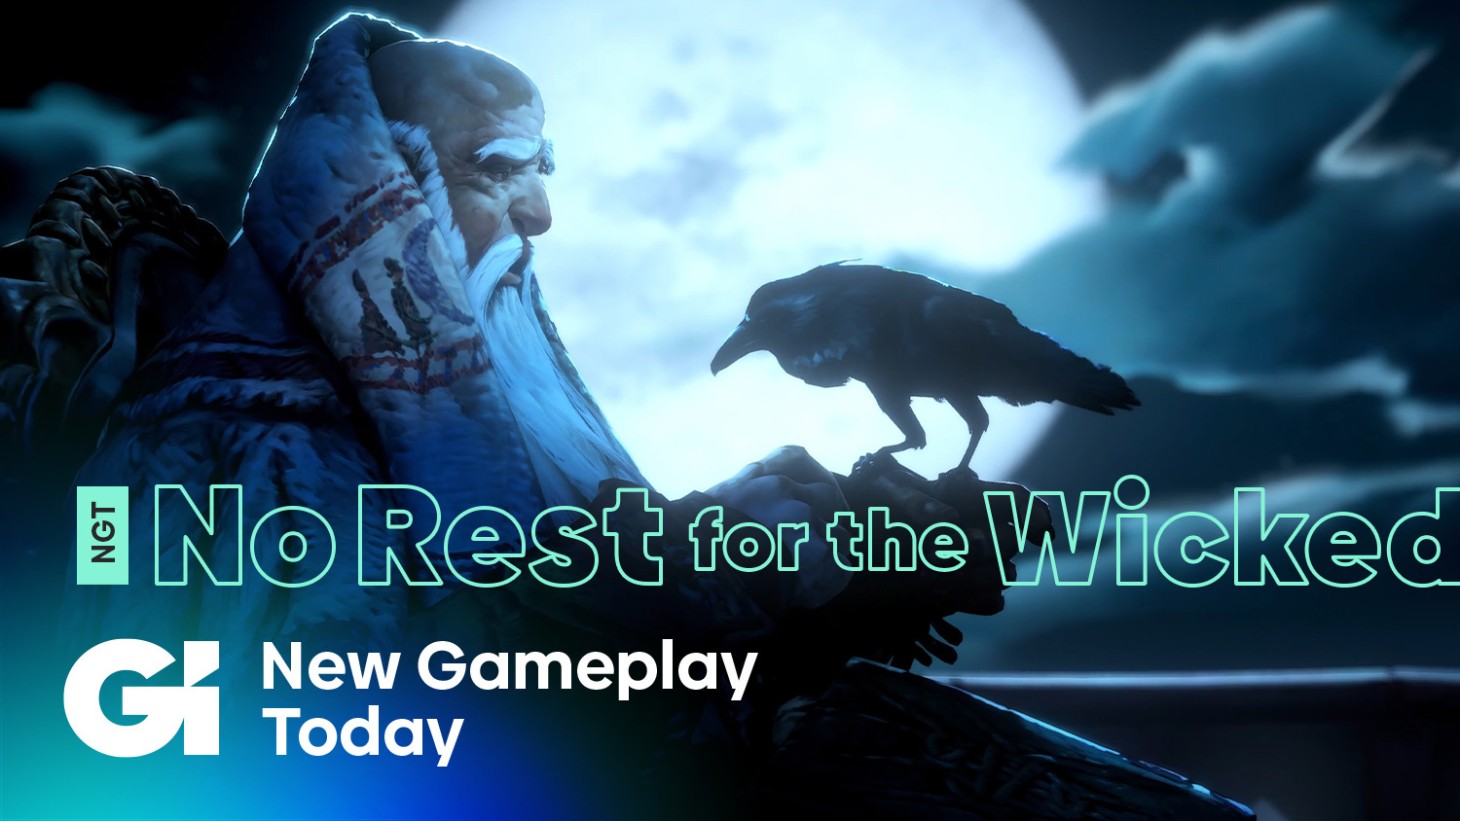 No Rest For The Wicked New Gameplay Today Game Informer Moon Studios action RPG Early Access